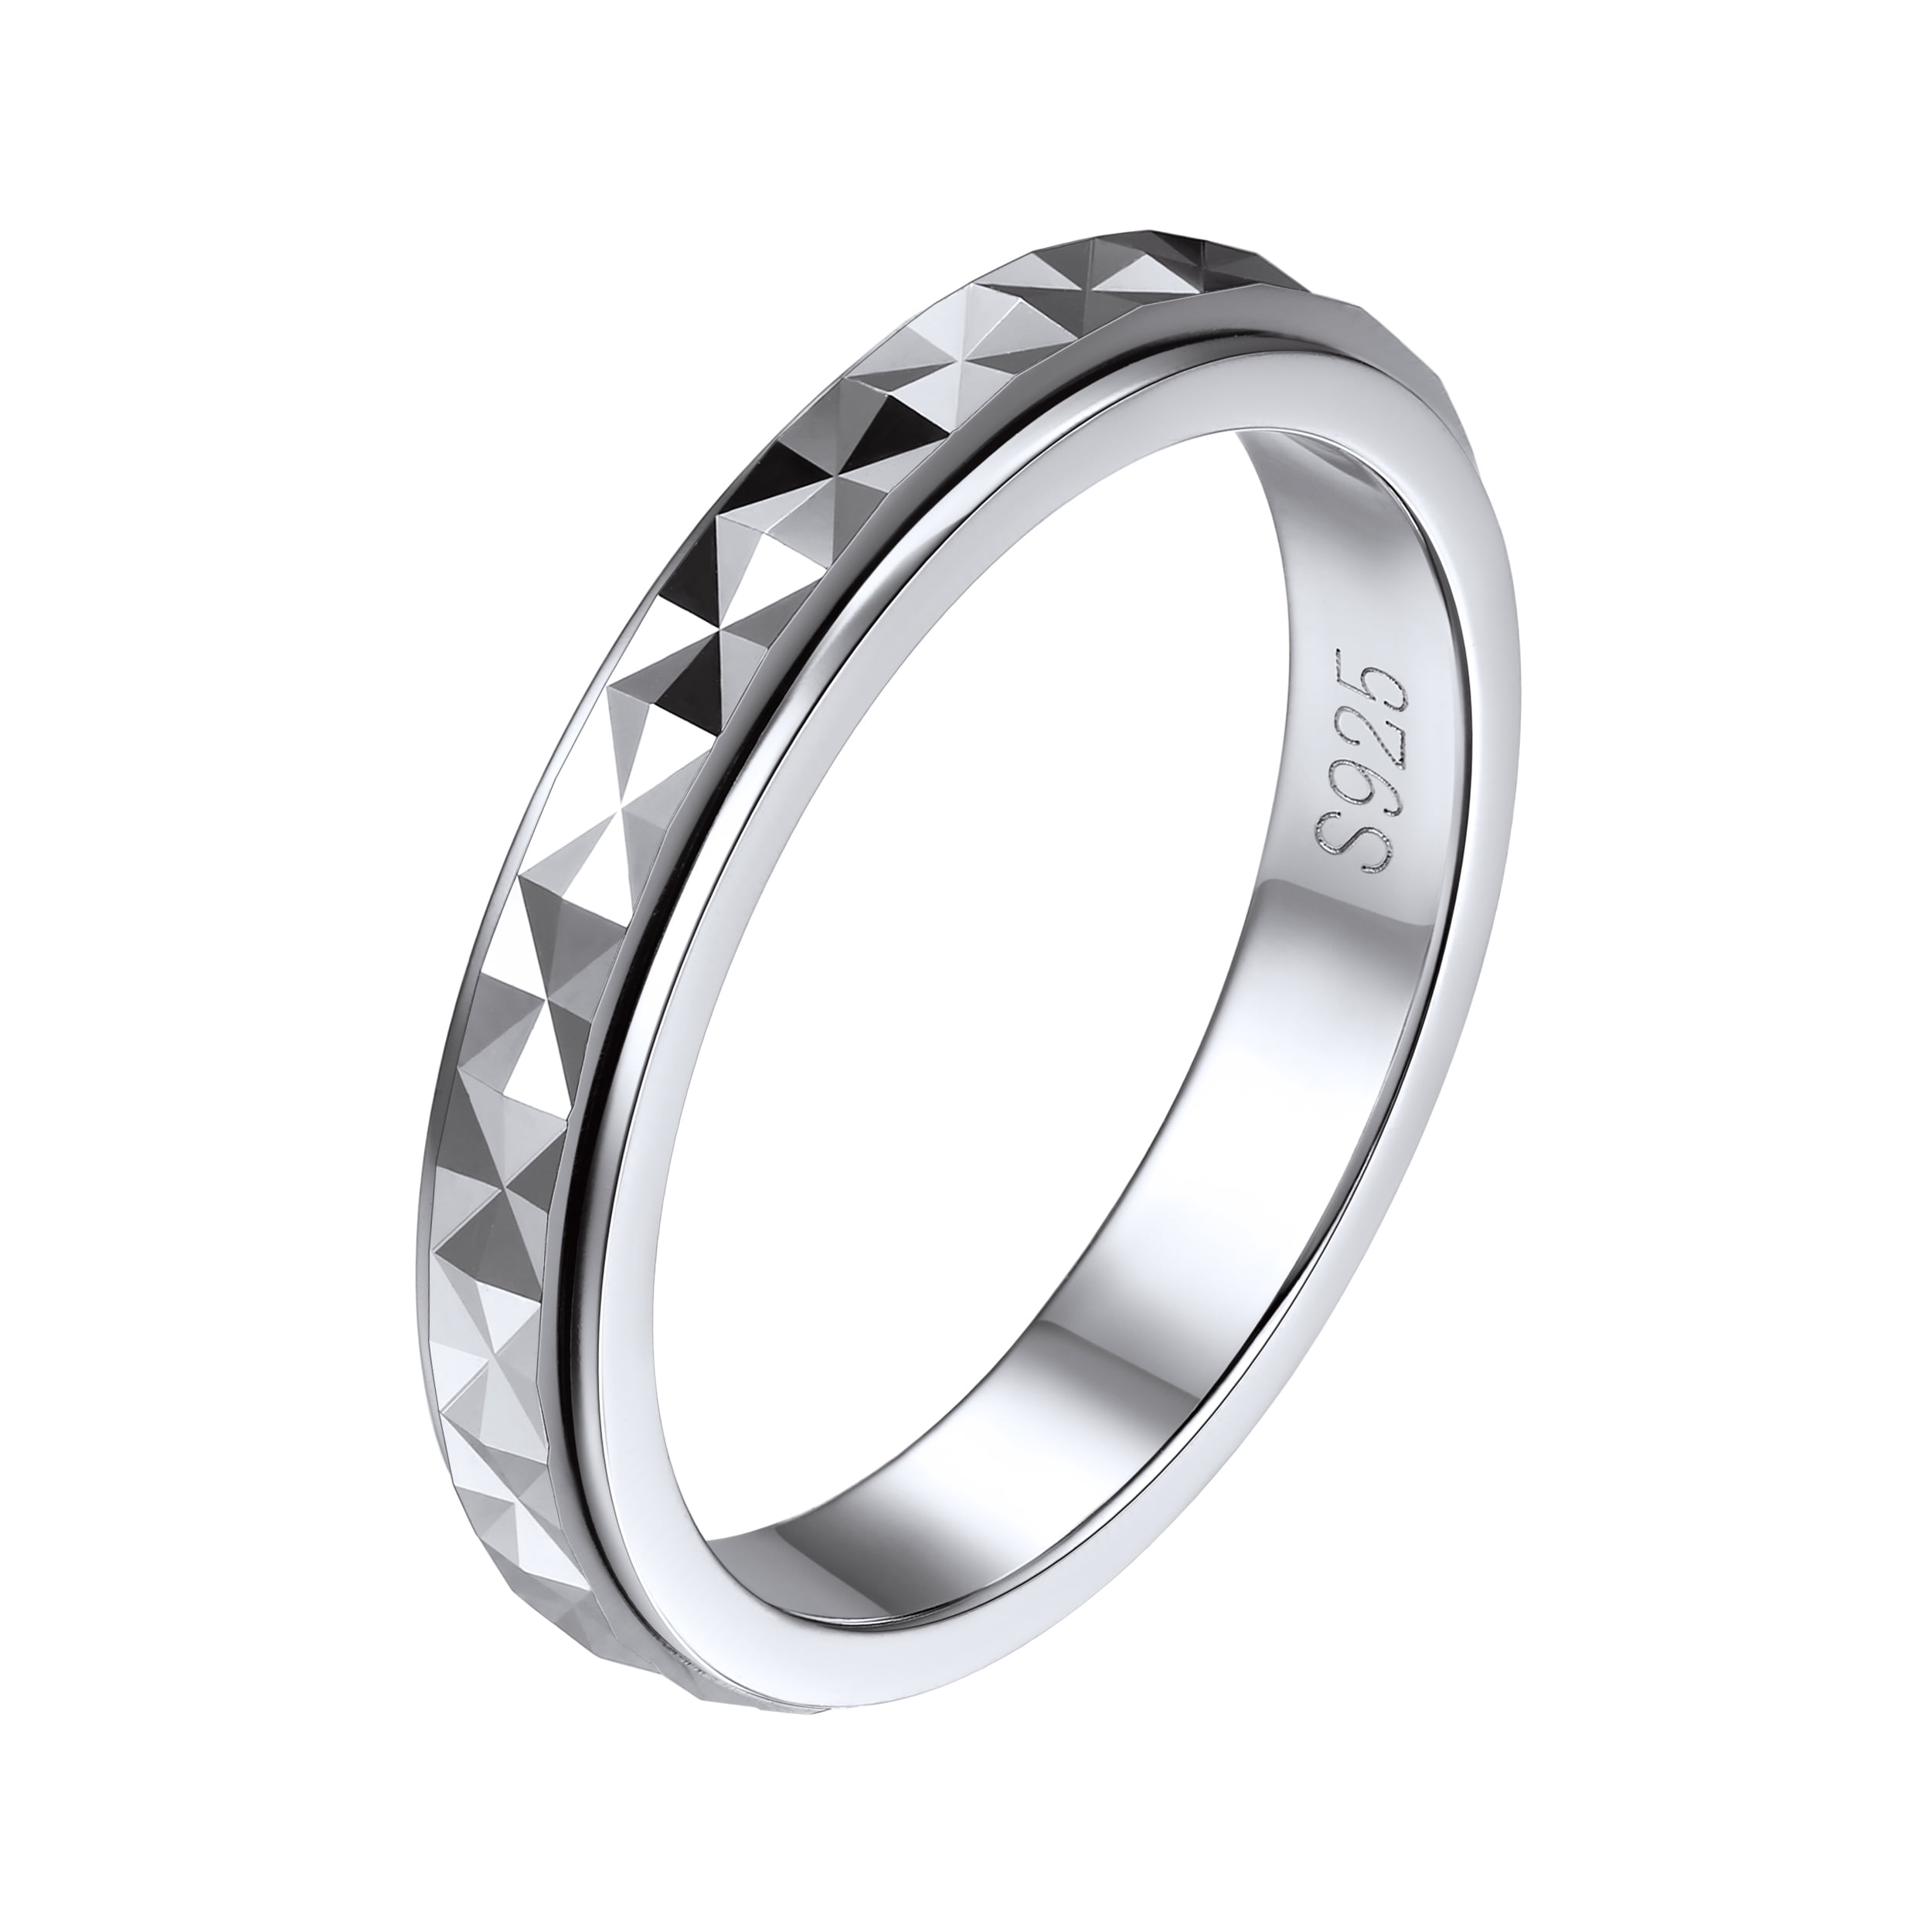 Buy 8mm Spinner Ring Stainless Steel Fidget Ring Anxiety Ring for Men (17)  at Amazon.in